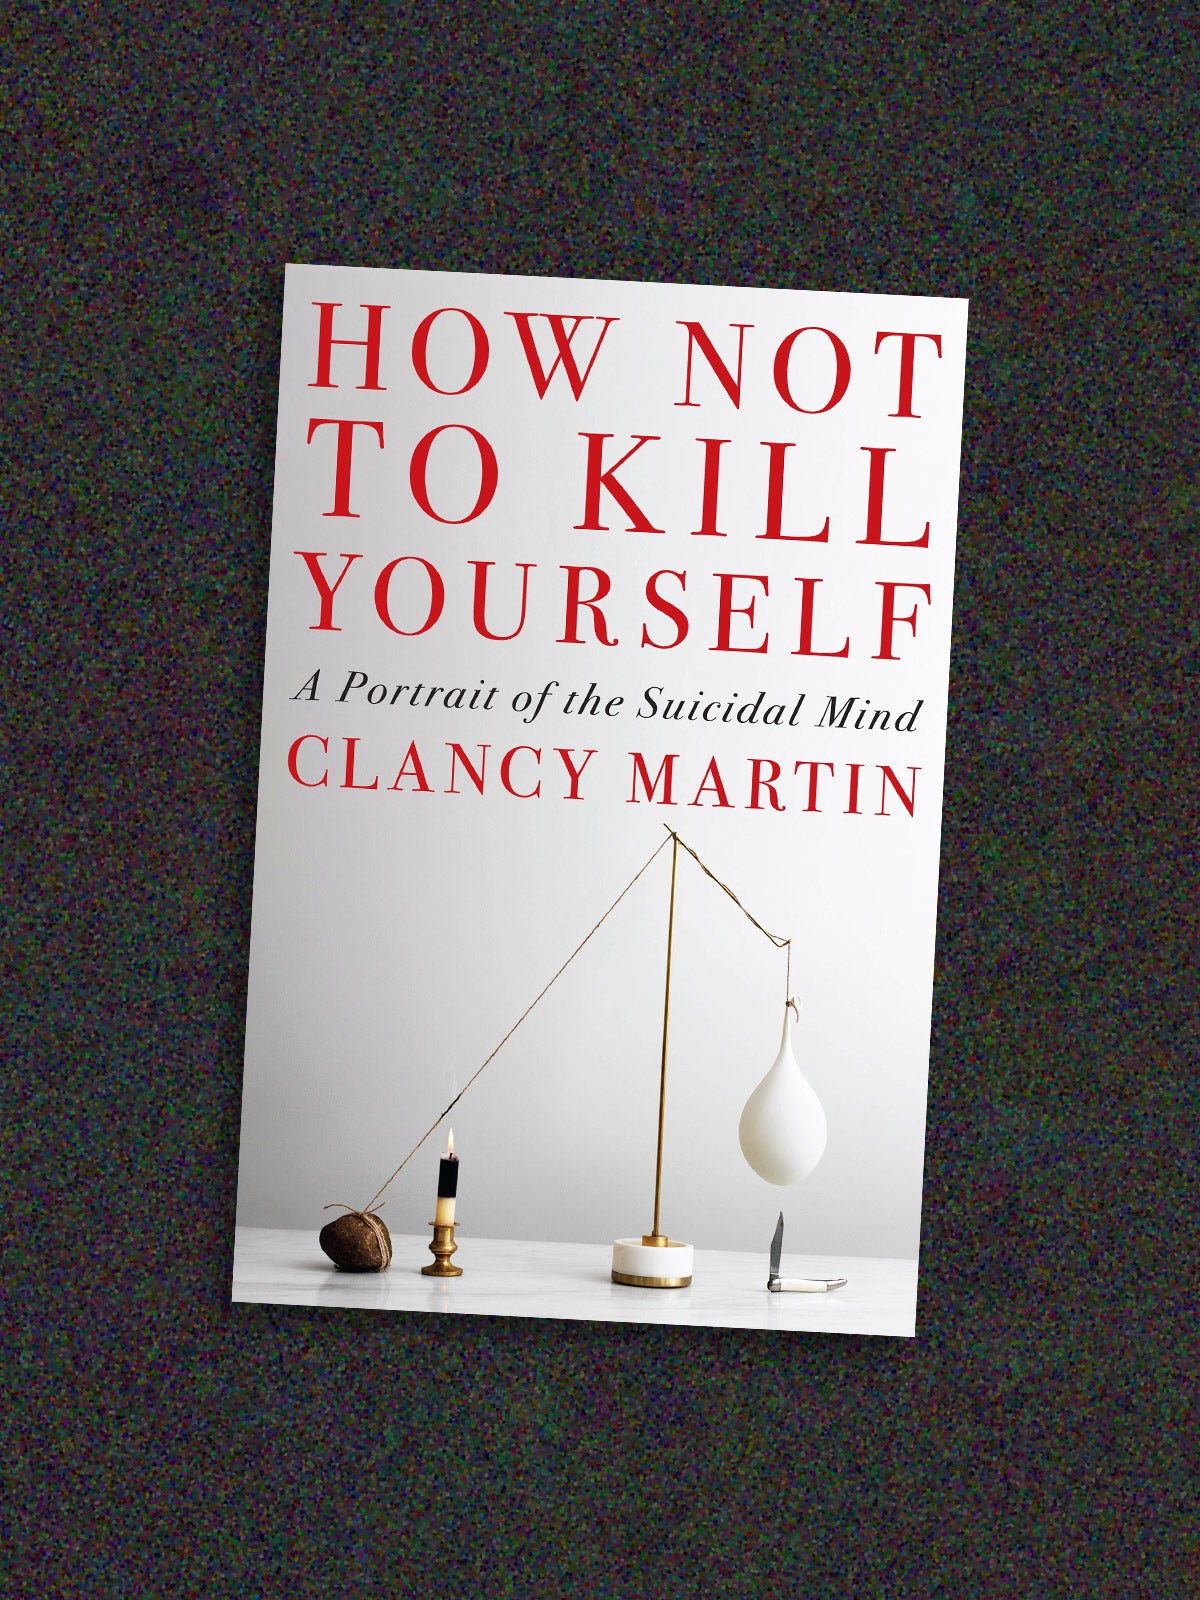 How To Kill Yourself Surviving suicidal thoughts: author Clancy Martin on finding hope